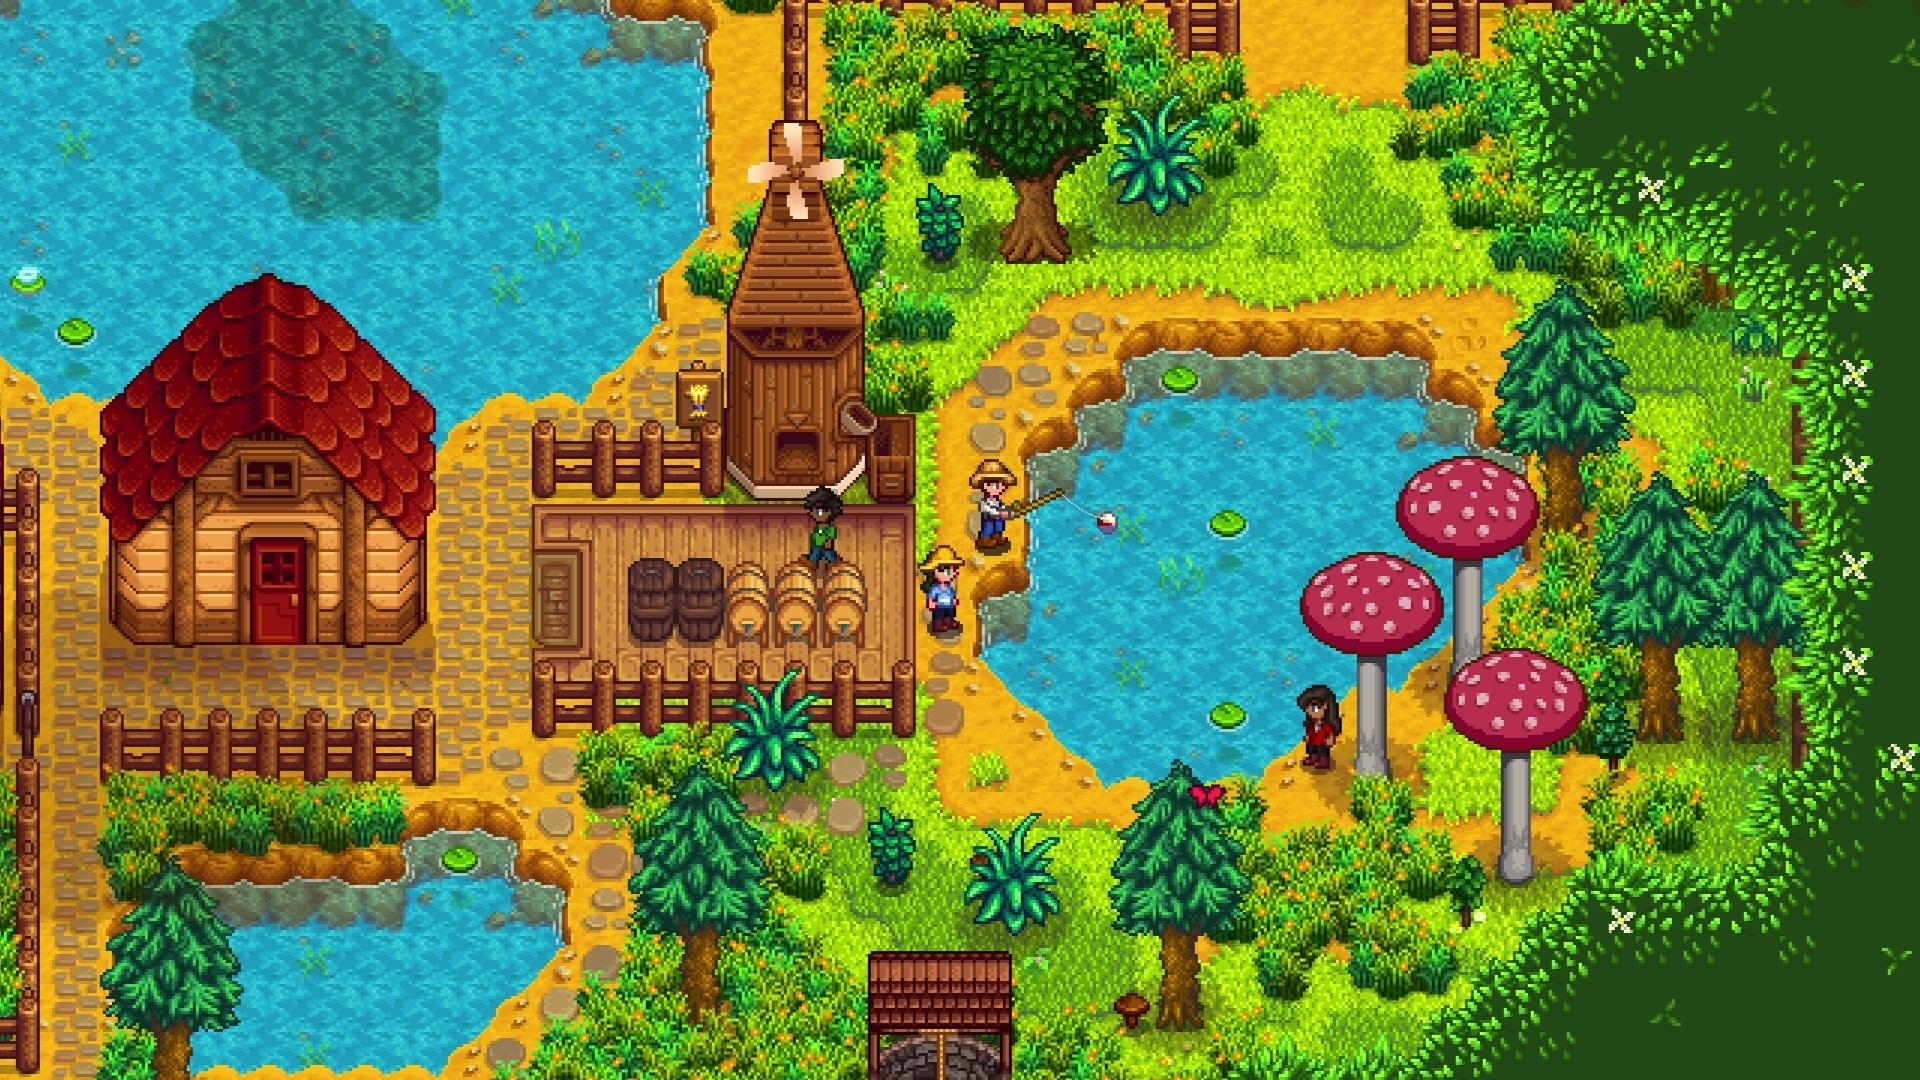 in-game screenshot from stardew valley